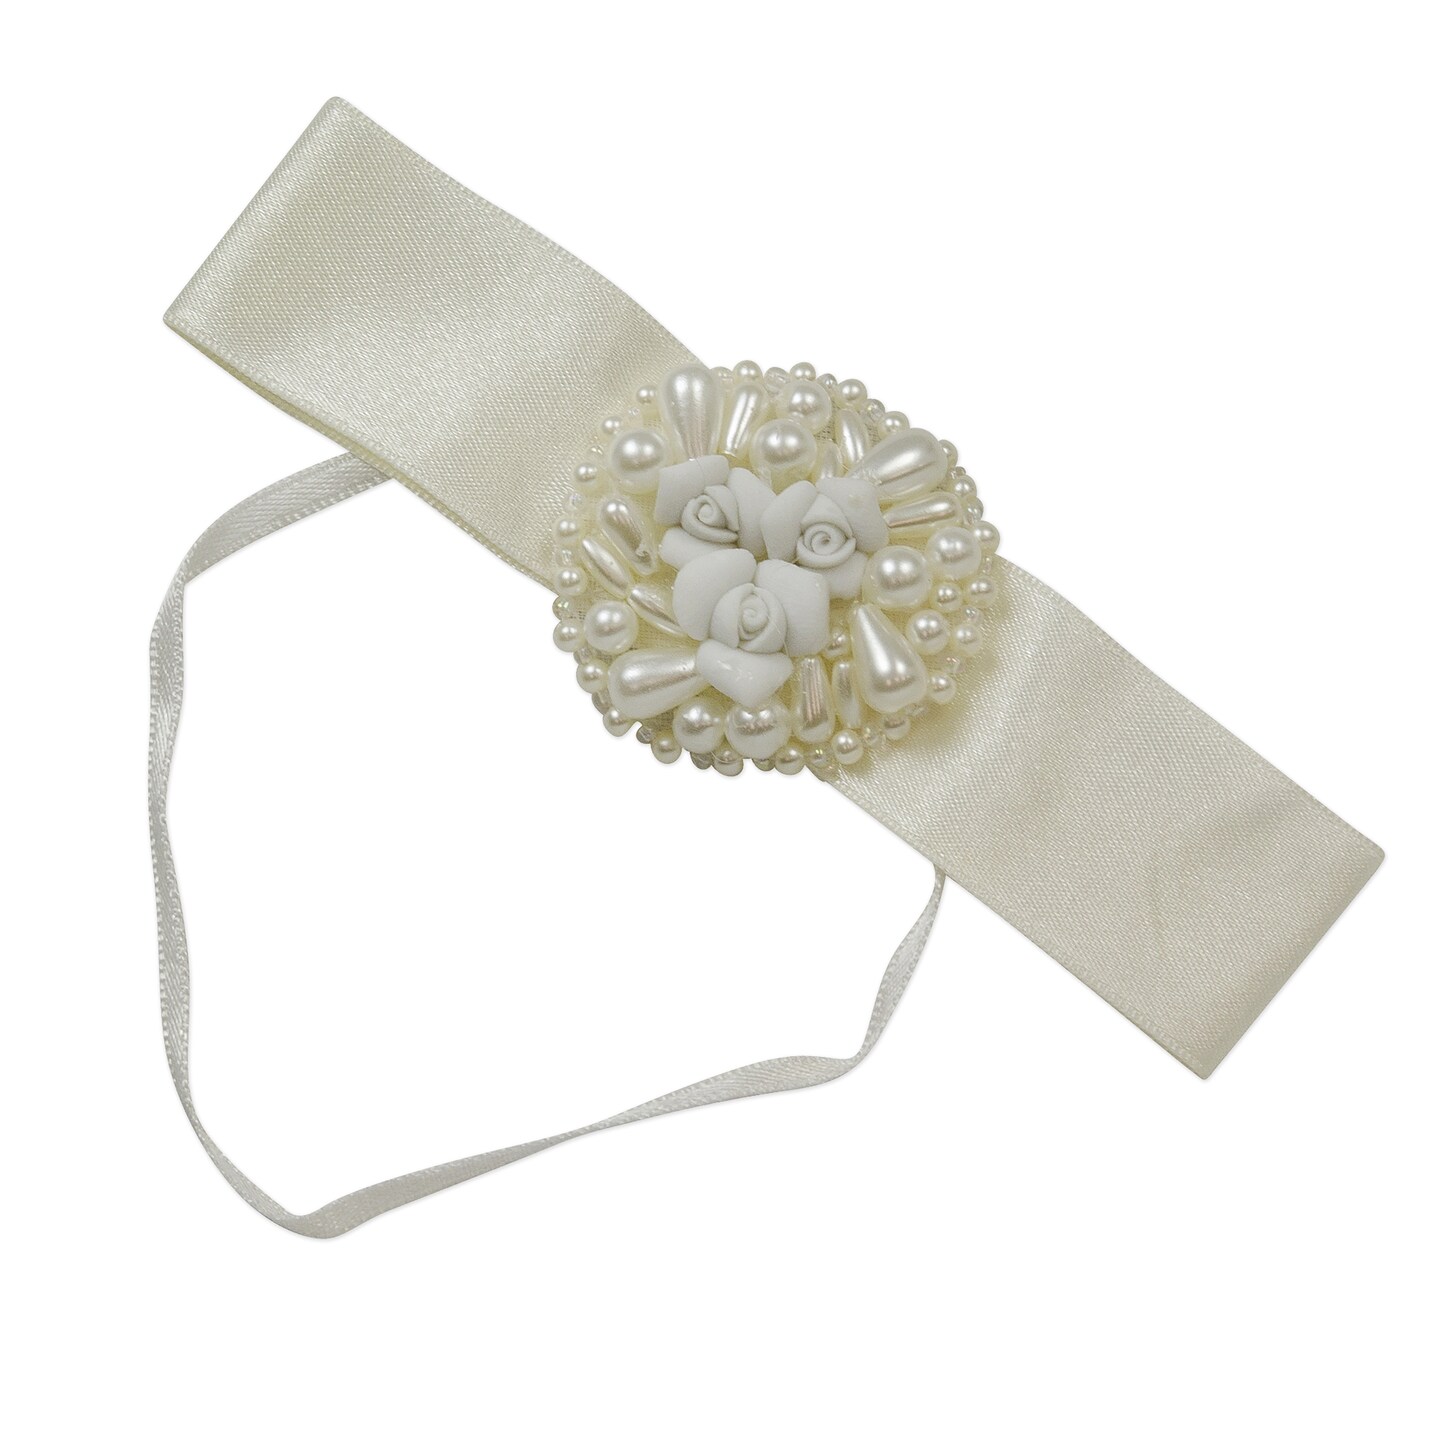 Vintage Bridal Bow with Pearls and Flower Applique